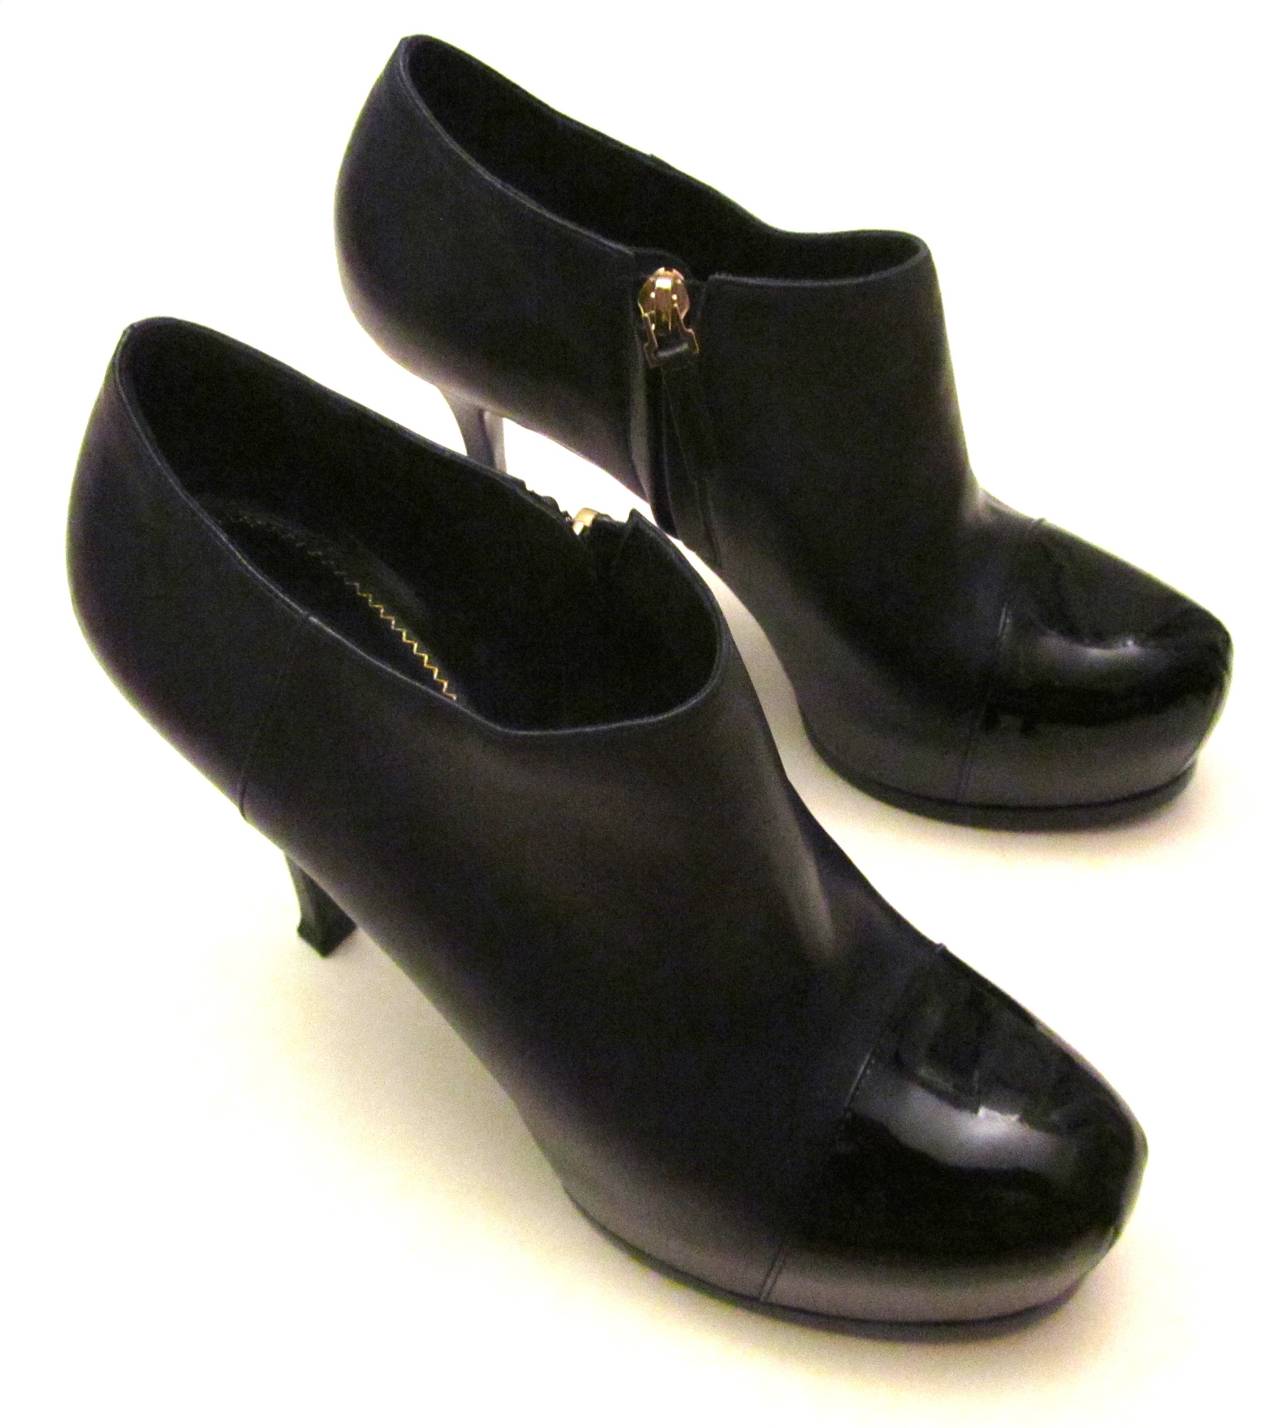 Yves Saint Laurent (YSL) ankle boots in navy blue. 